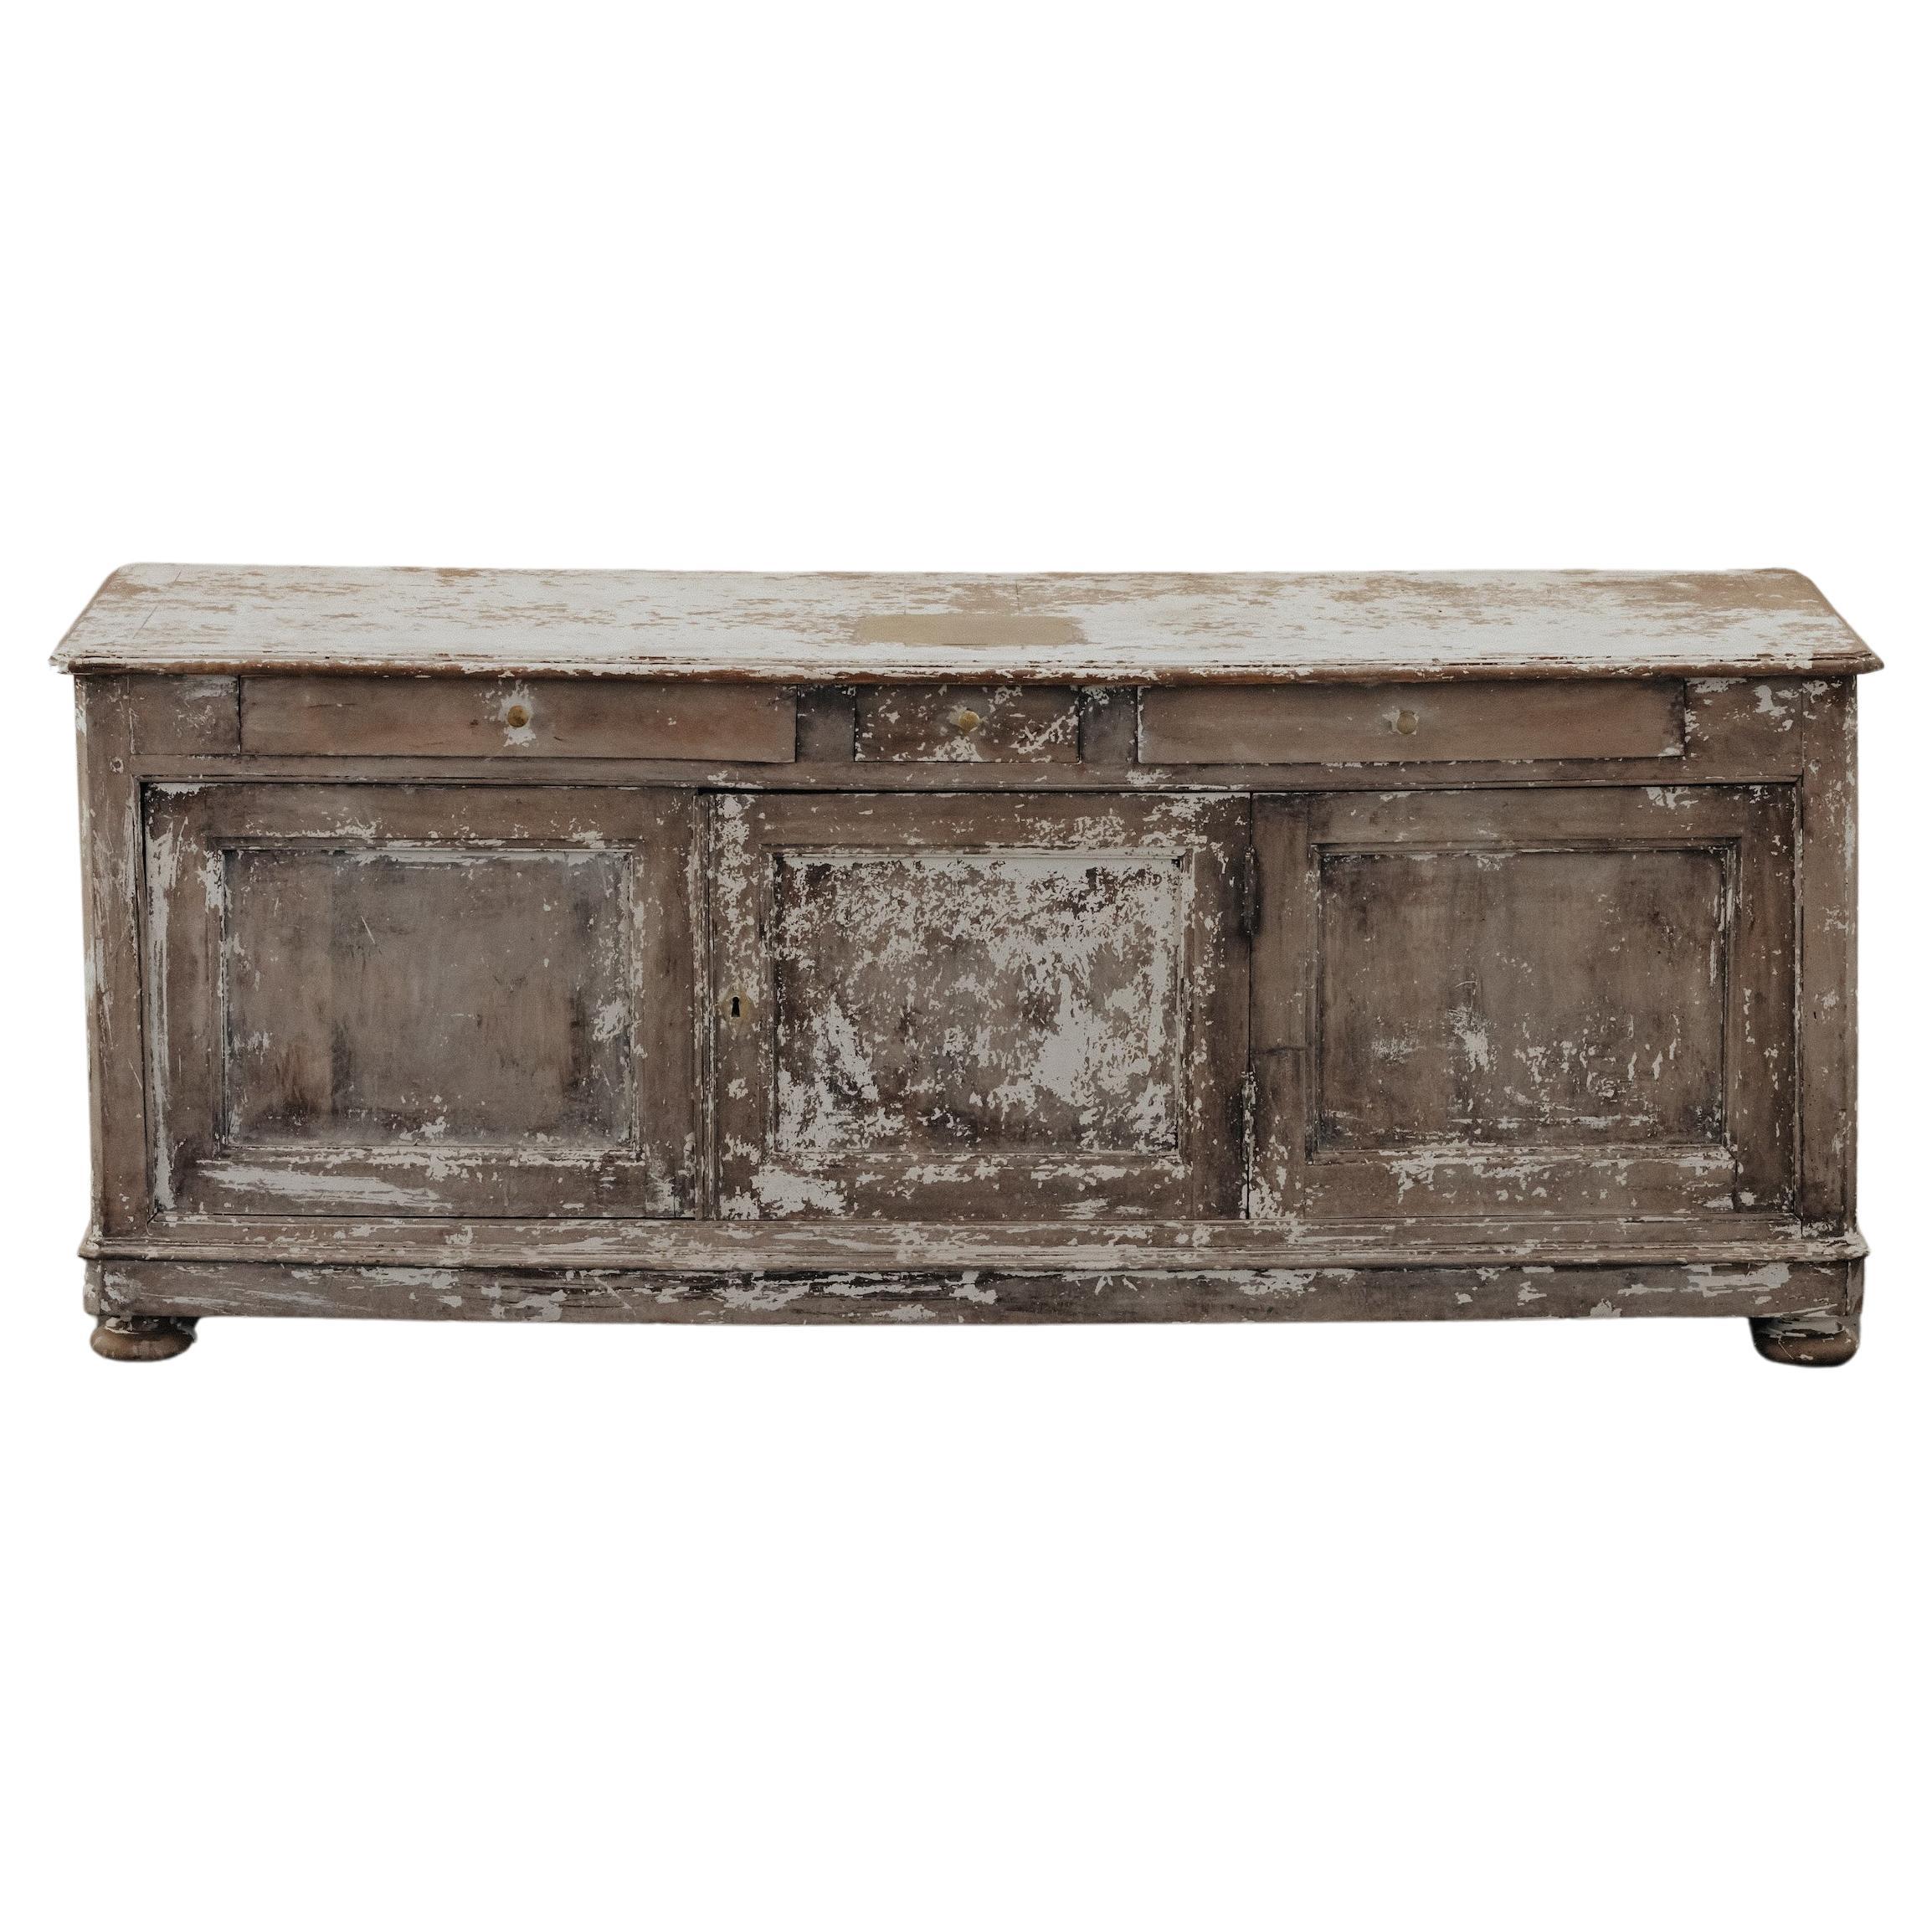 Early Painted Shop Counter From France, Circa 1920 For Sale